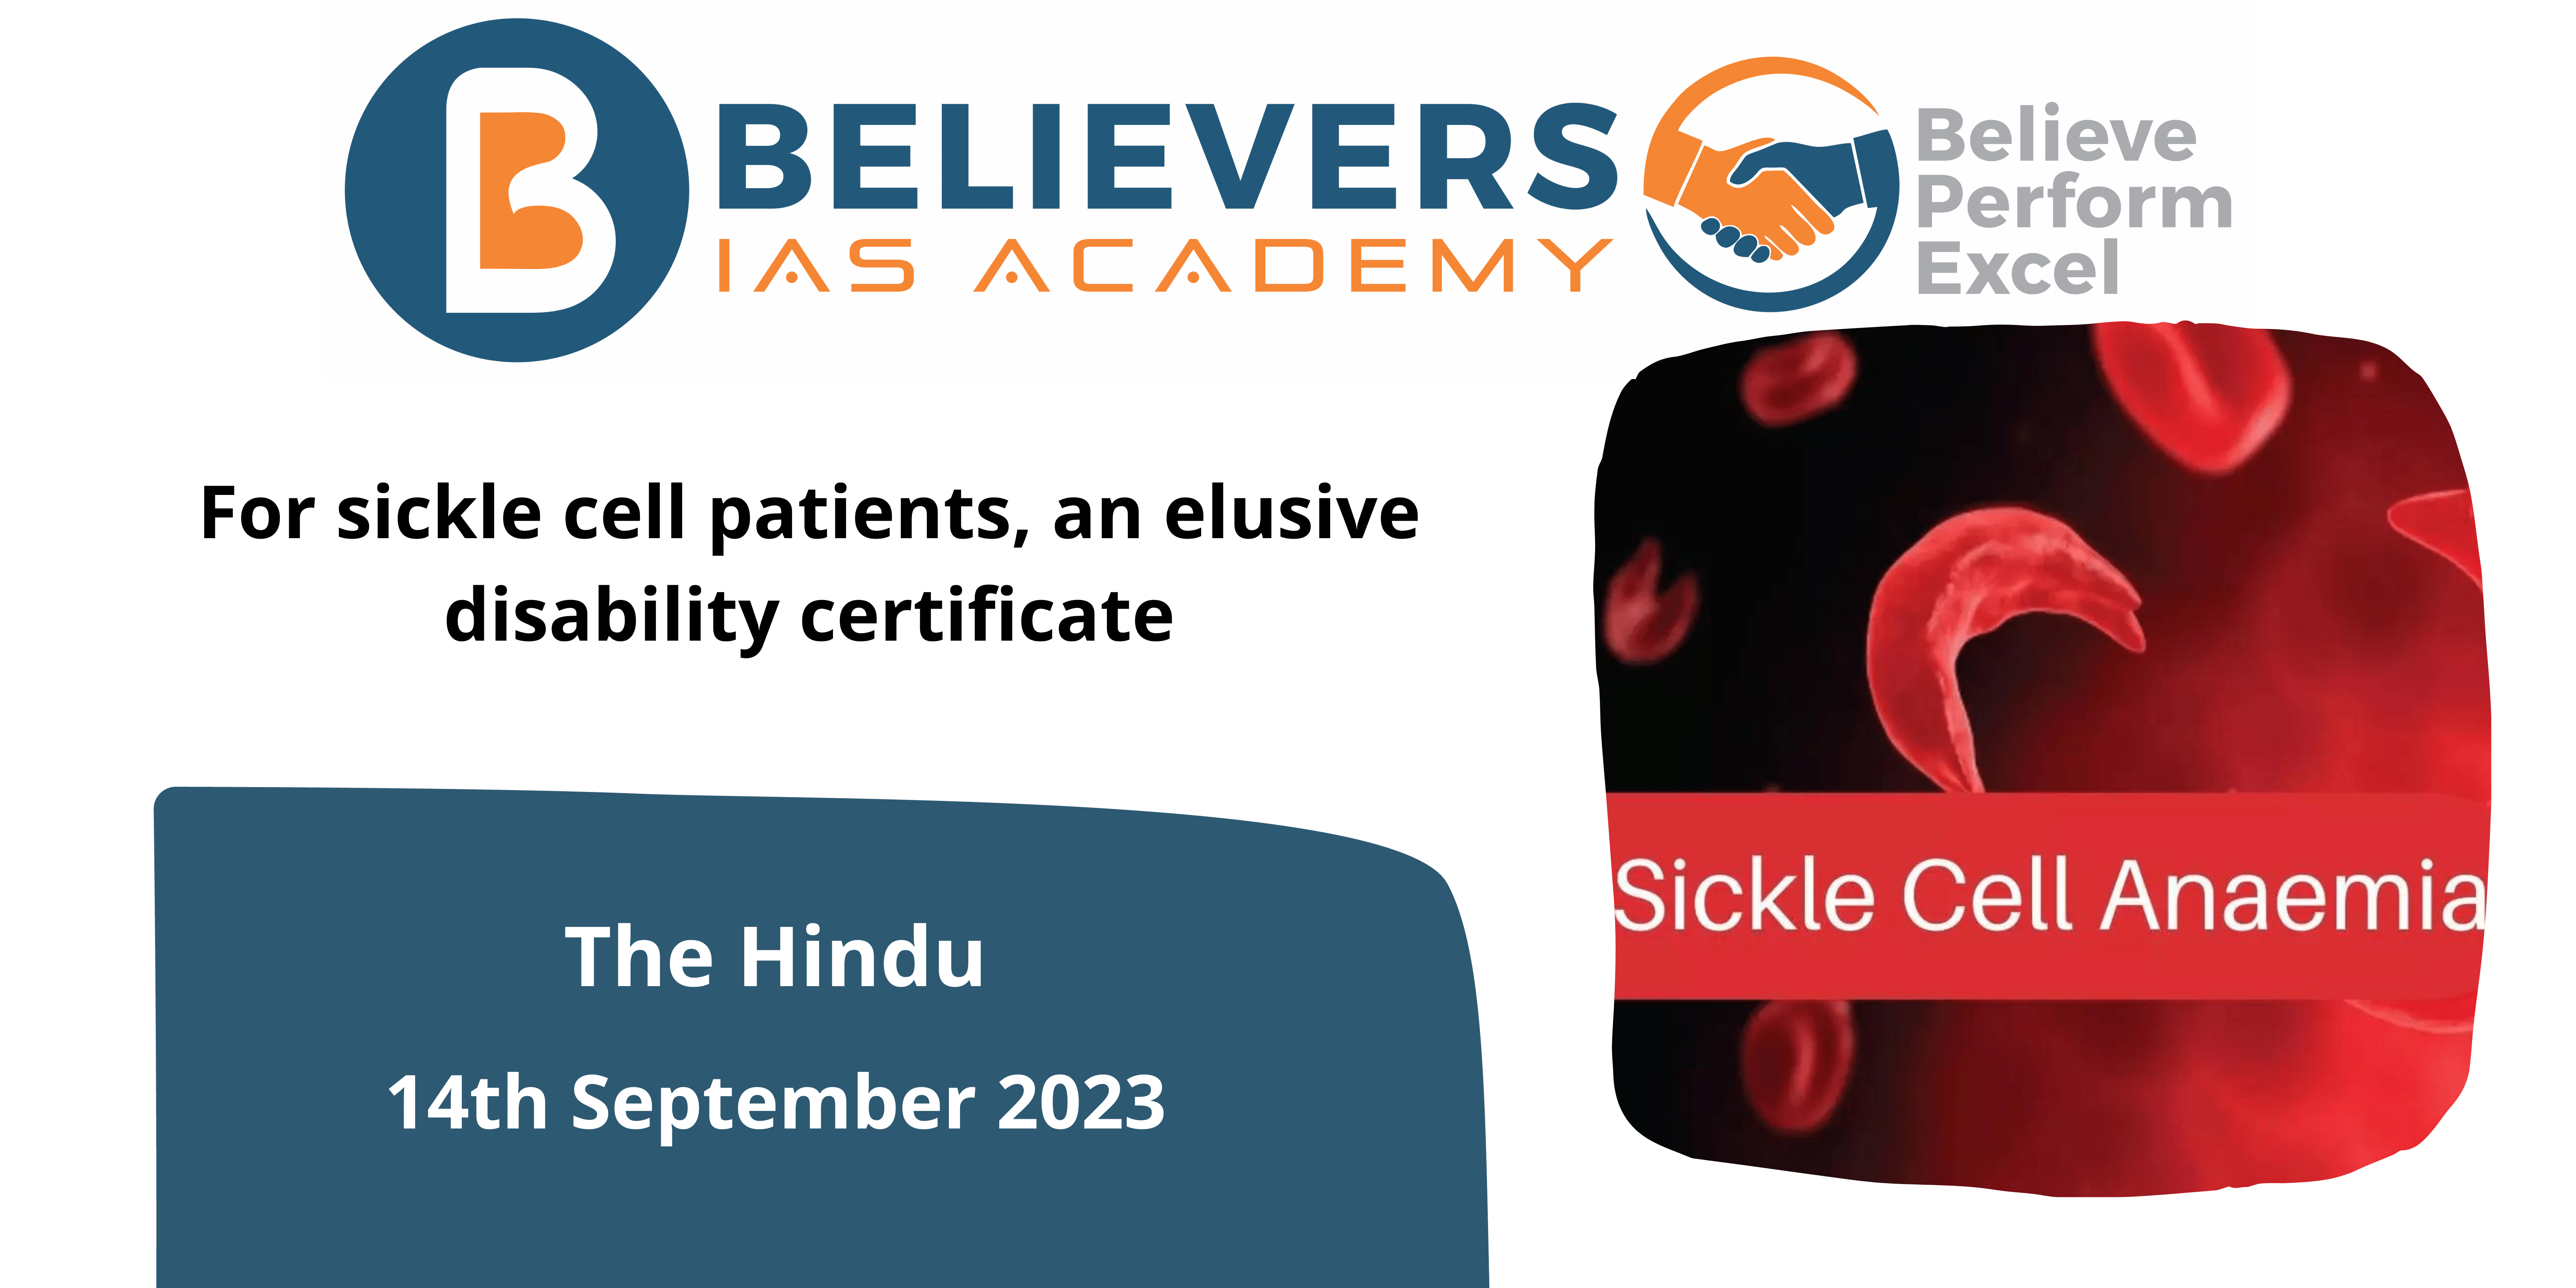 For sickle cell patients, an elusive disability certificate